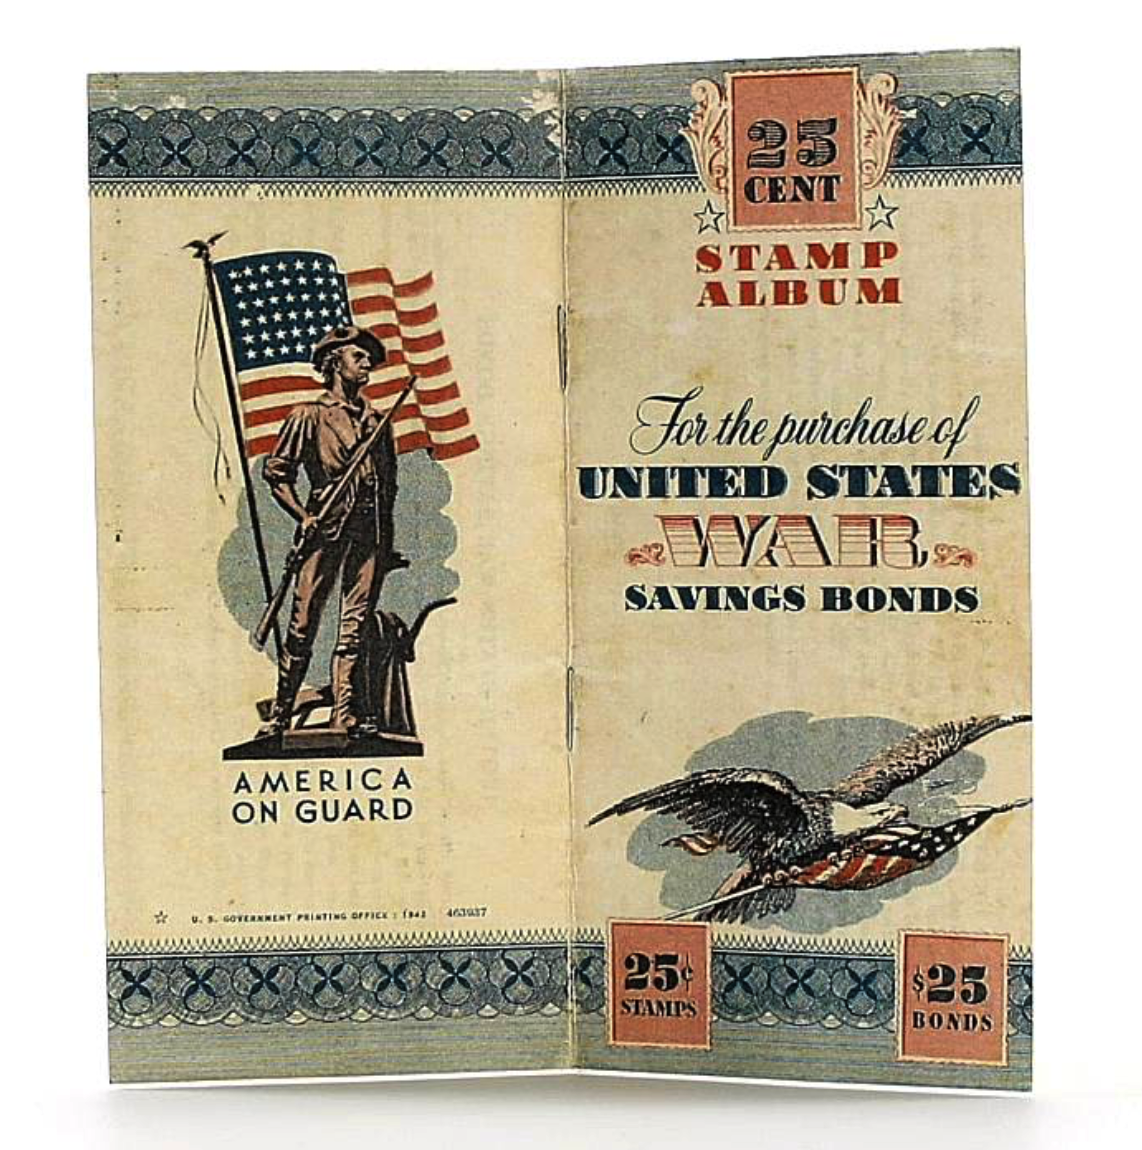 25 Cent Stamp Album for the purchase of the United States War Savings Bonds